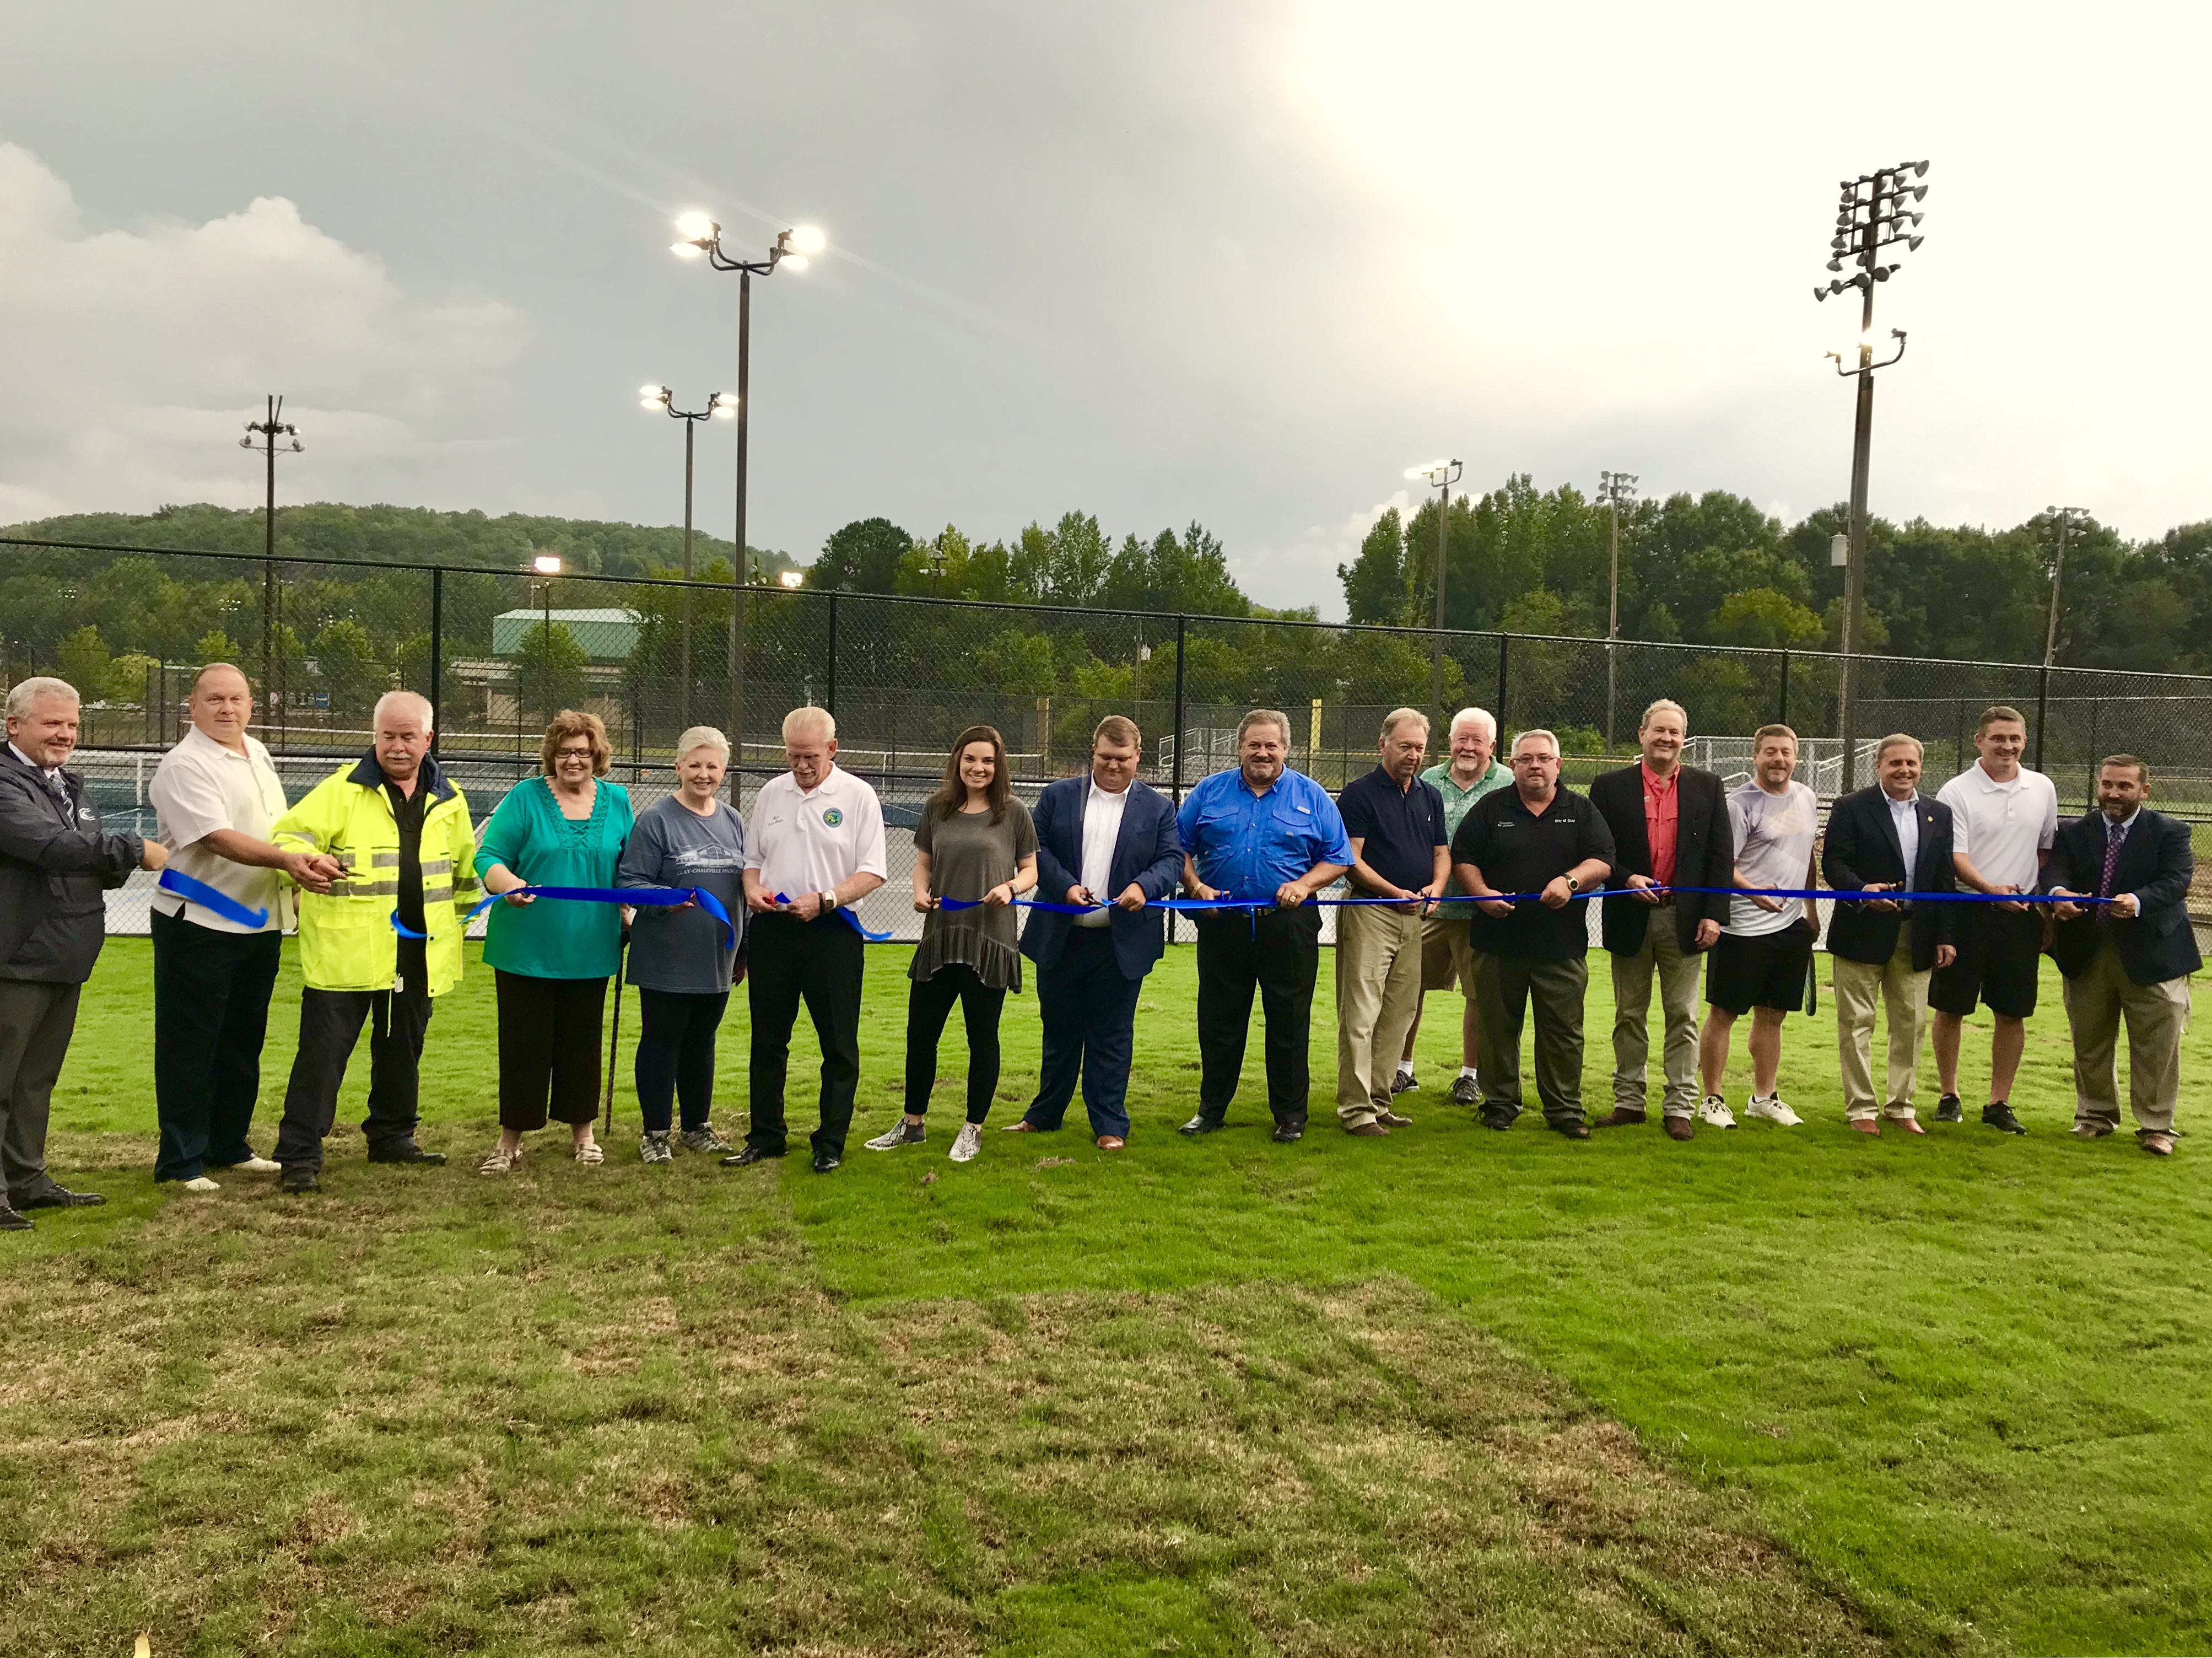 City of Clay holds ribbon cutting for tennis, pickleball courts prior to council meeting